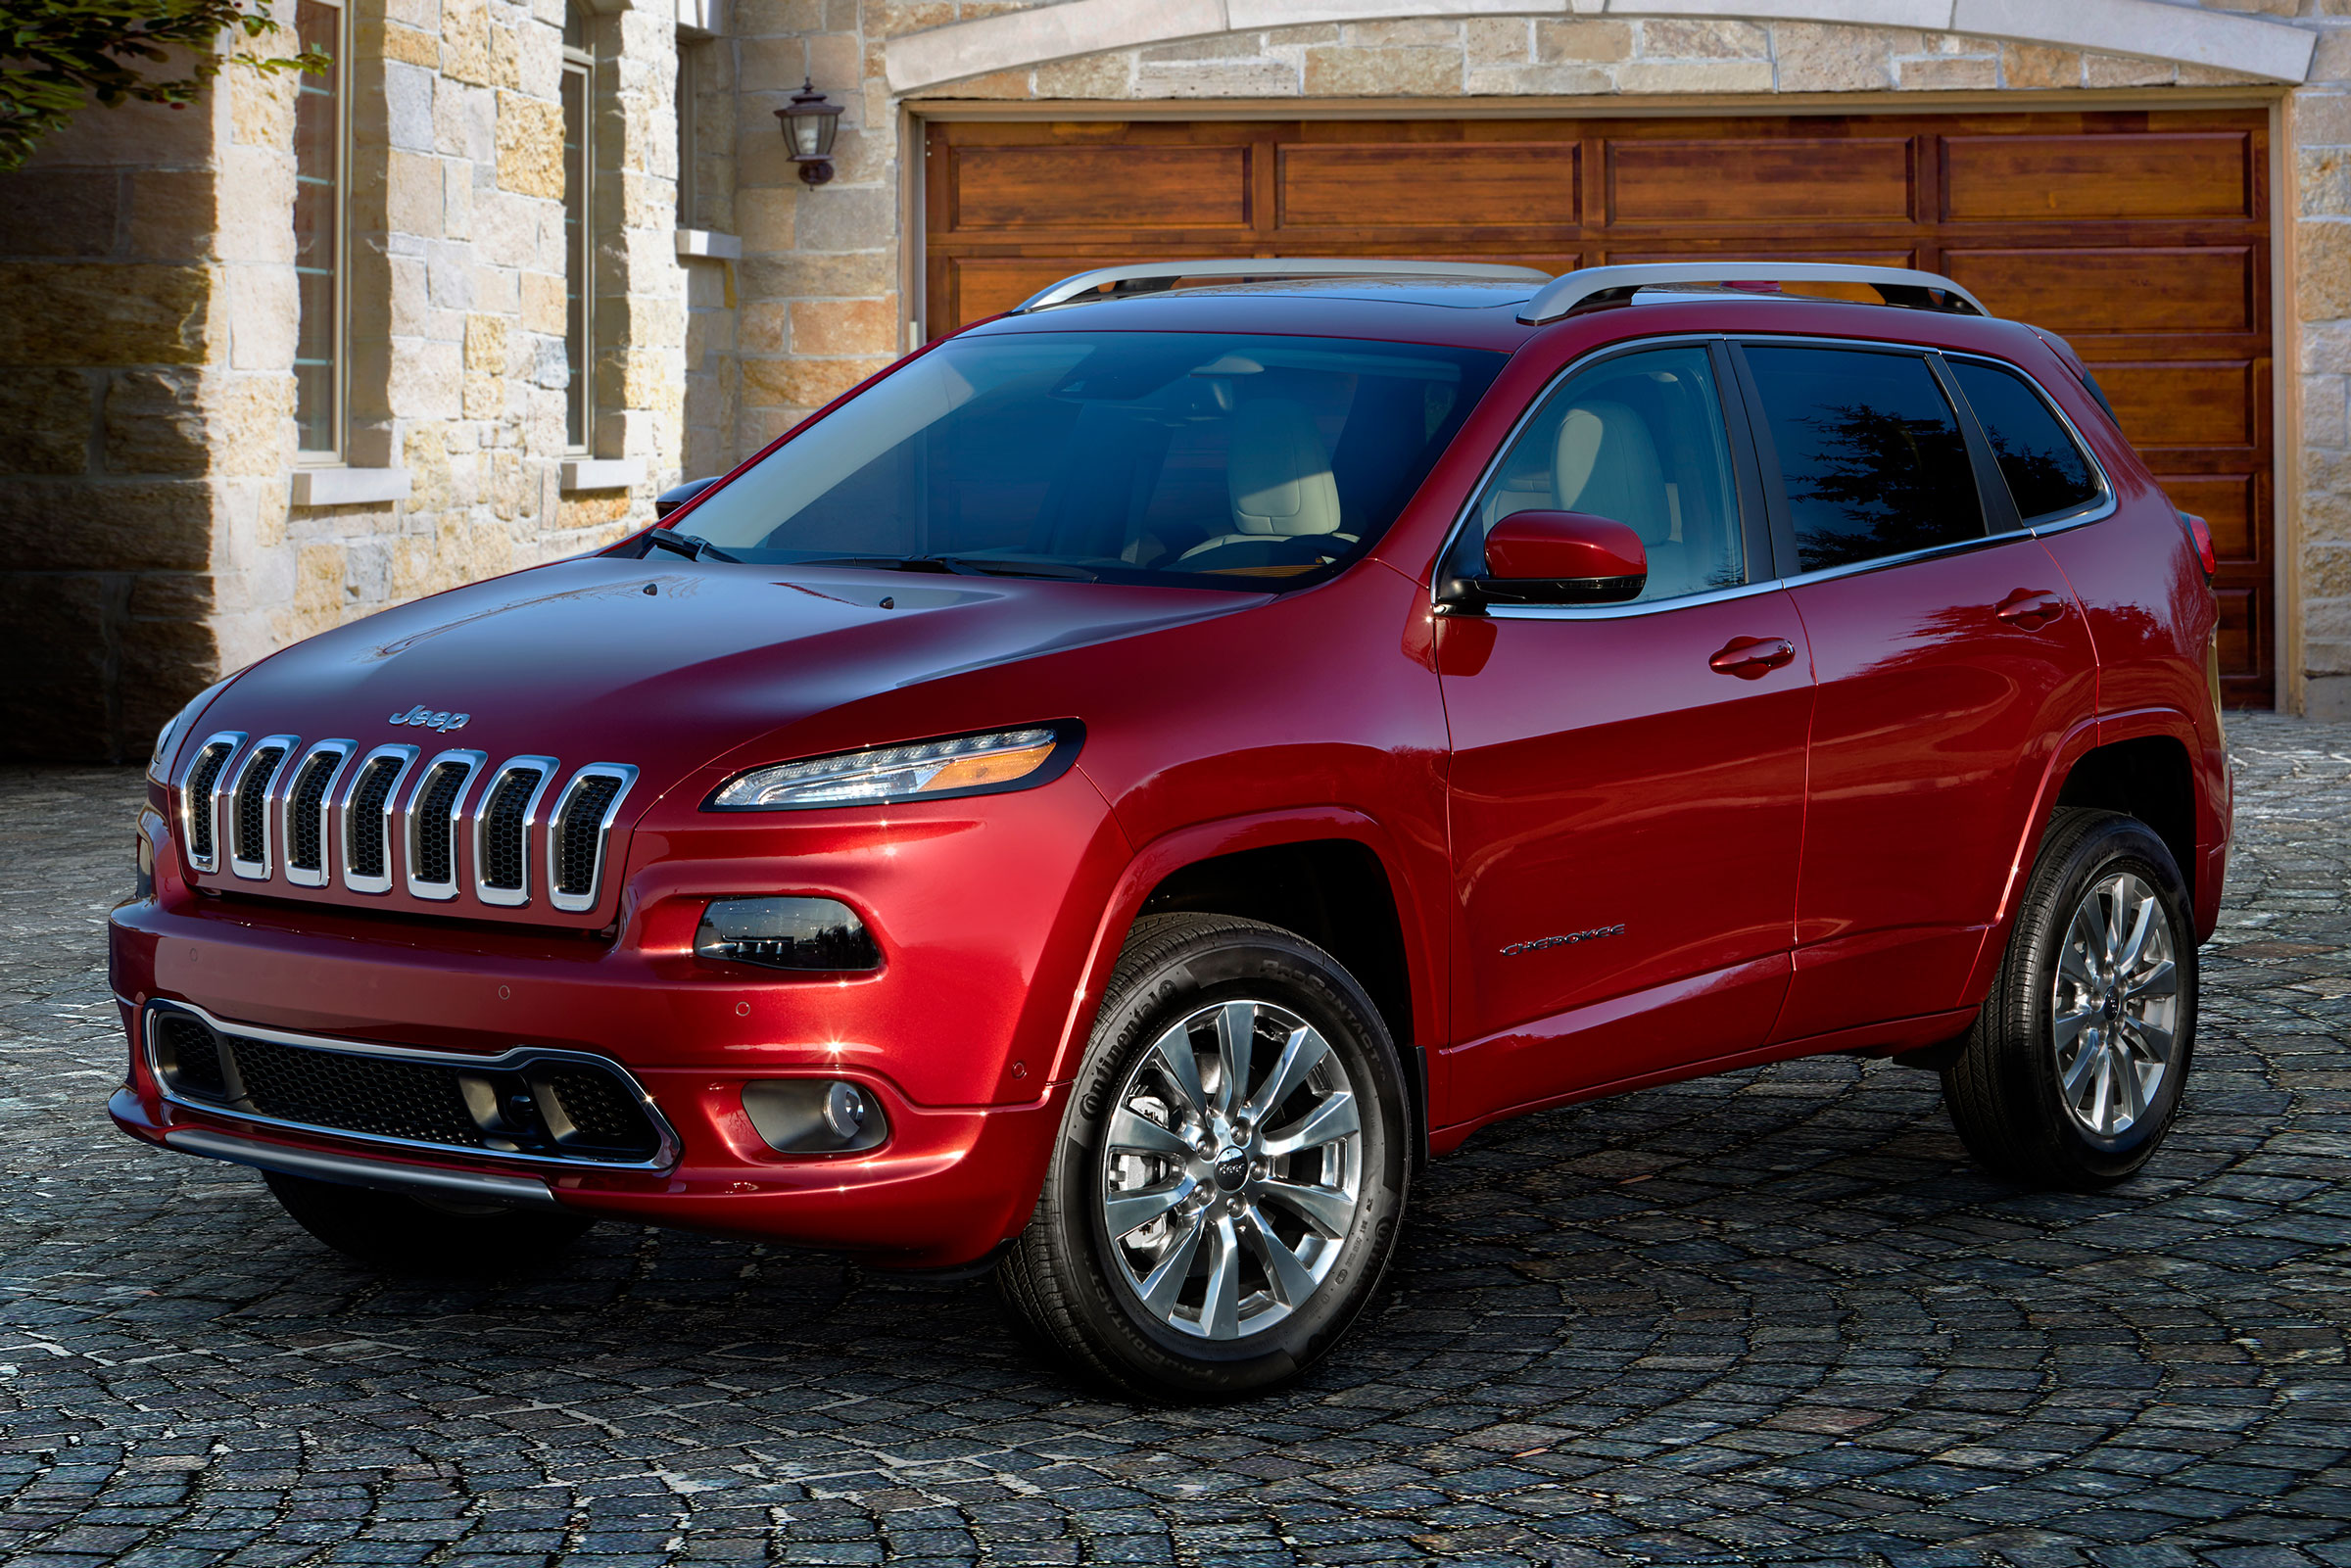 New Jeep Cherokee Overland arrives to top the range | Auto Express